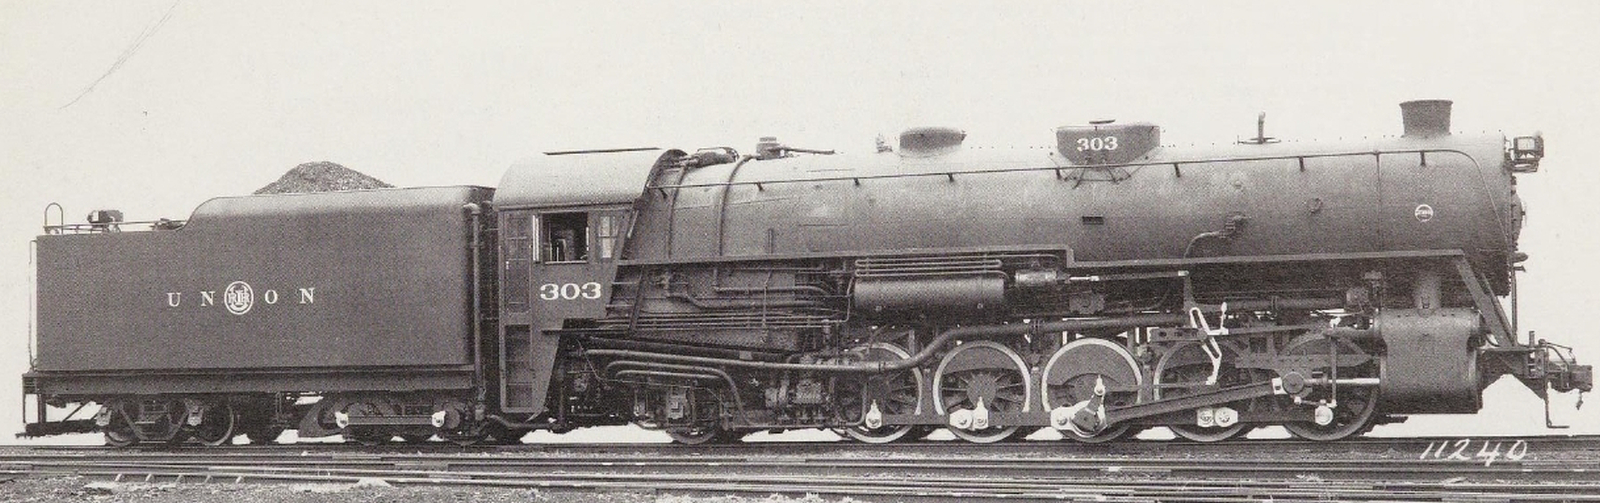 No. 303 on a works photo